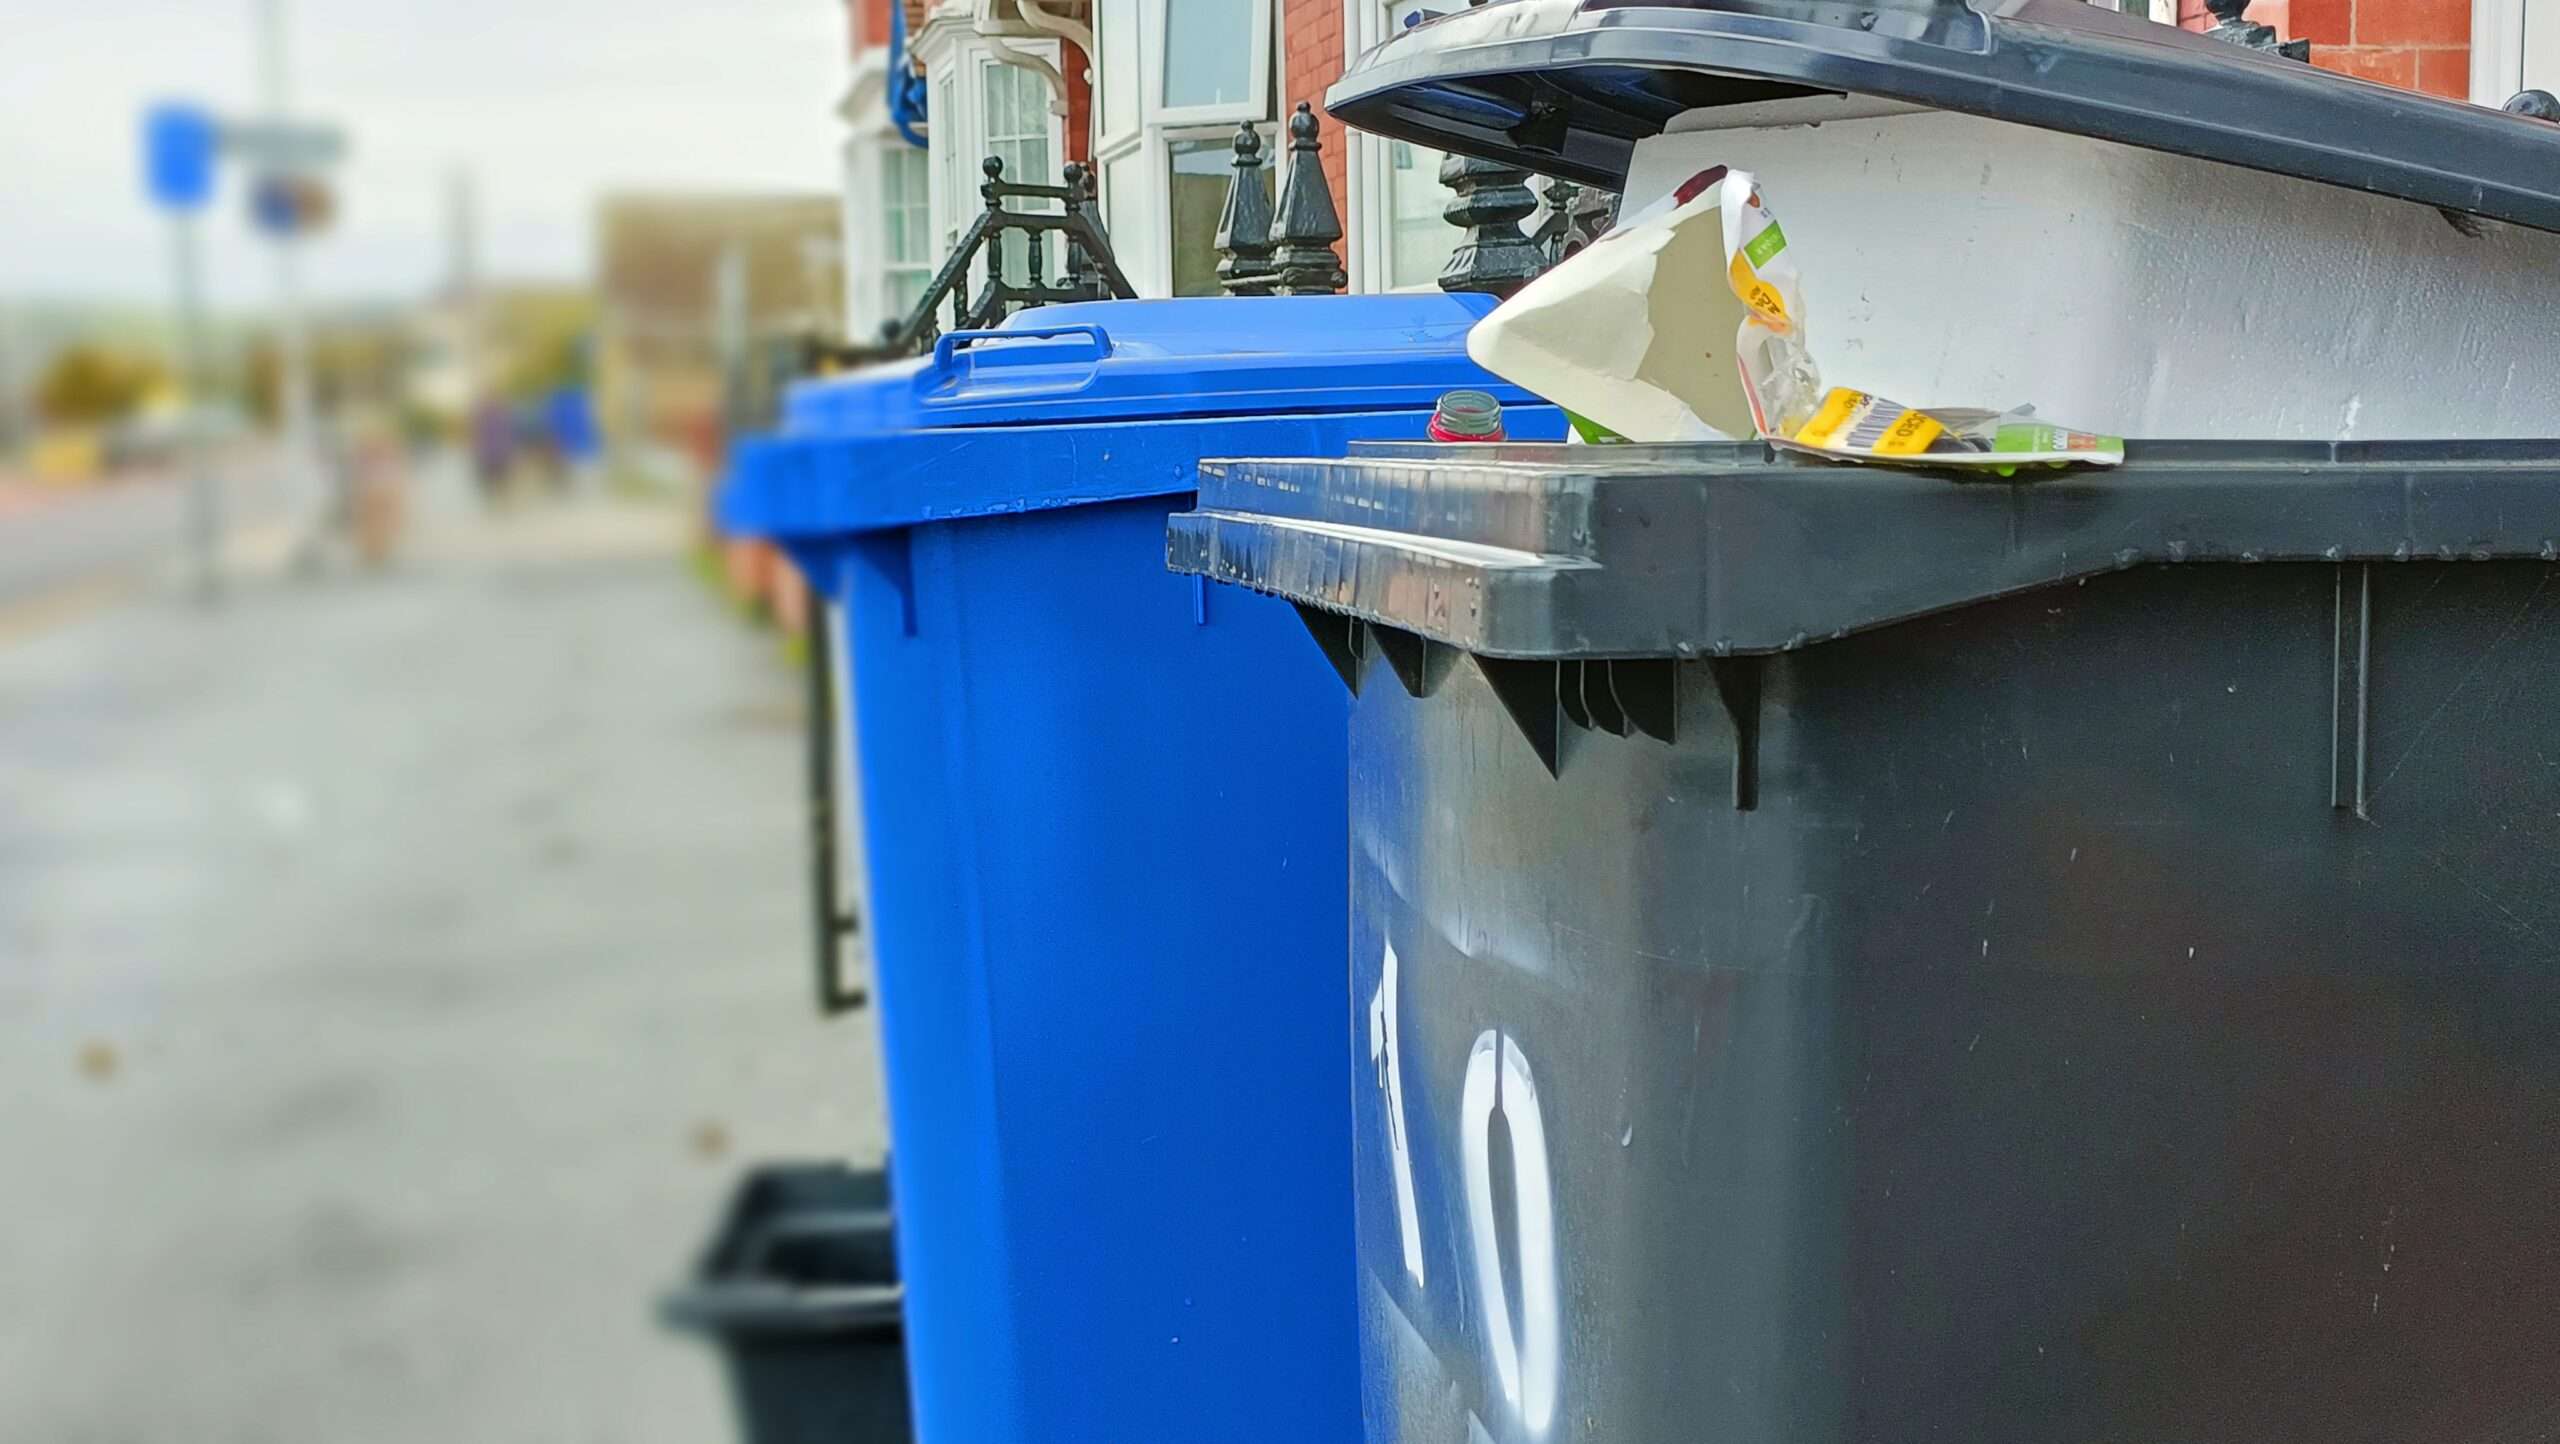 Disruption to bin collection days in Newport and Caerphilly over Christmas